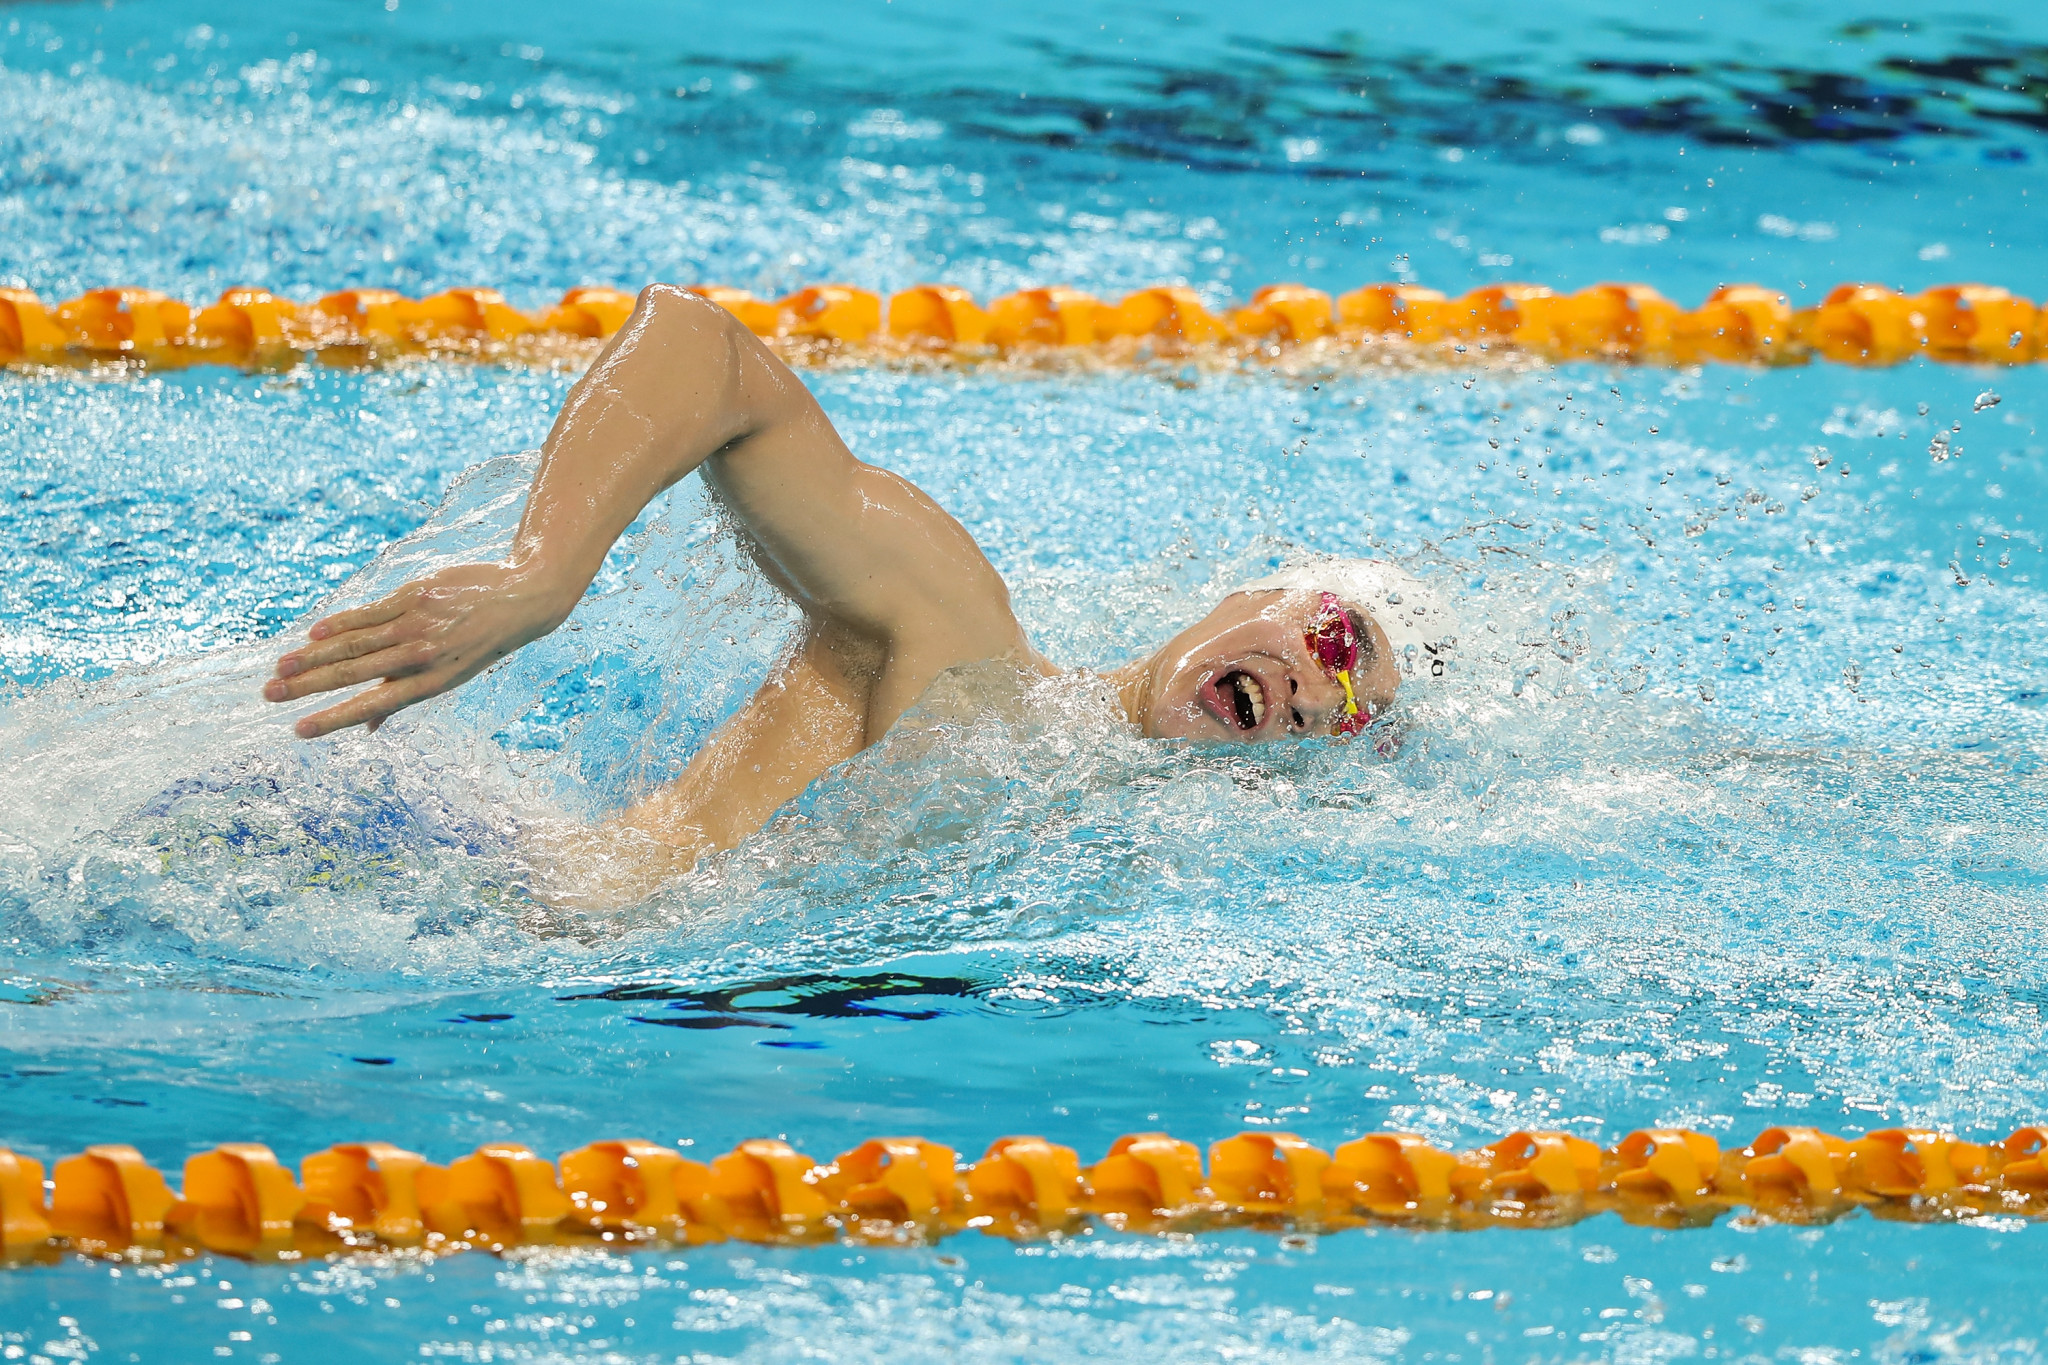 Sun Yang is seeking to have his eight-year ban overturned or reduced ©Getty Images